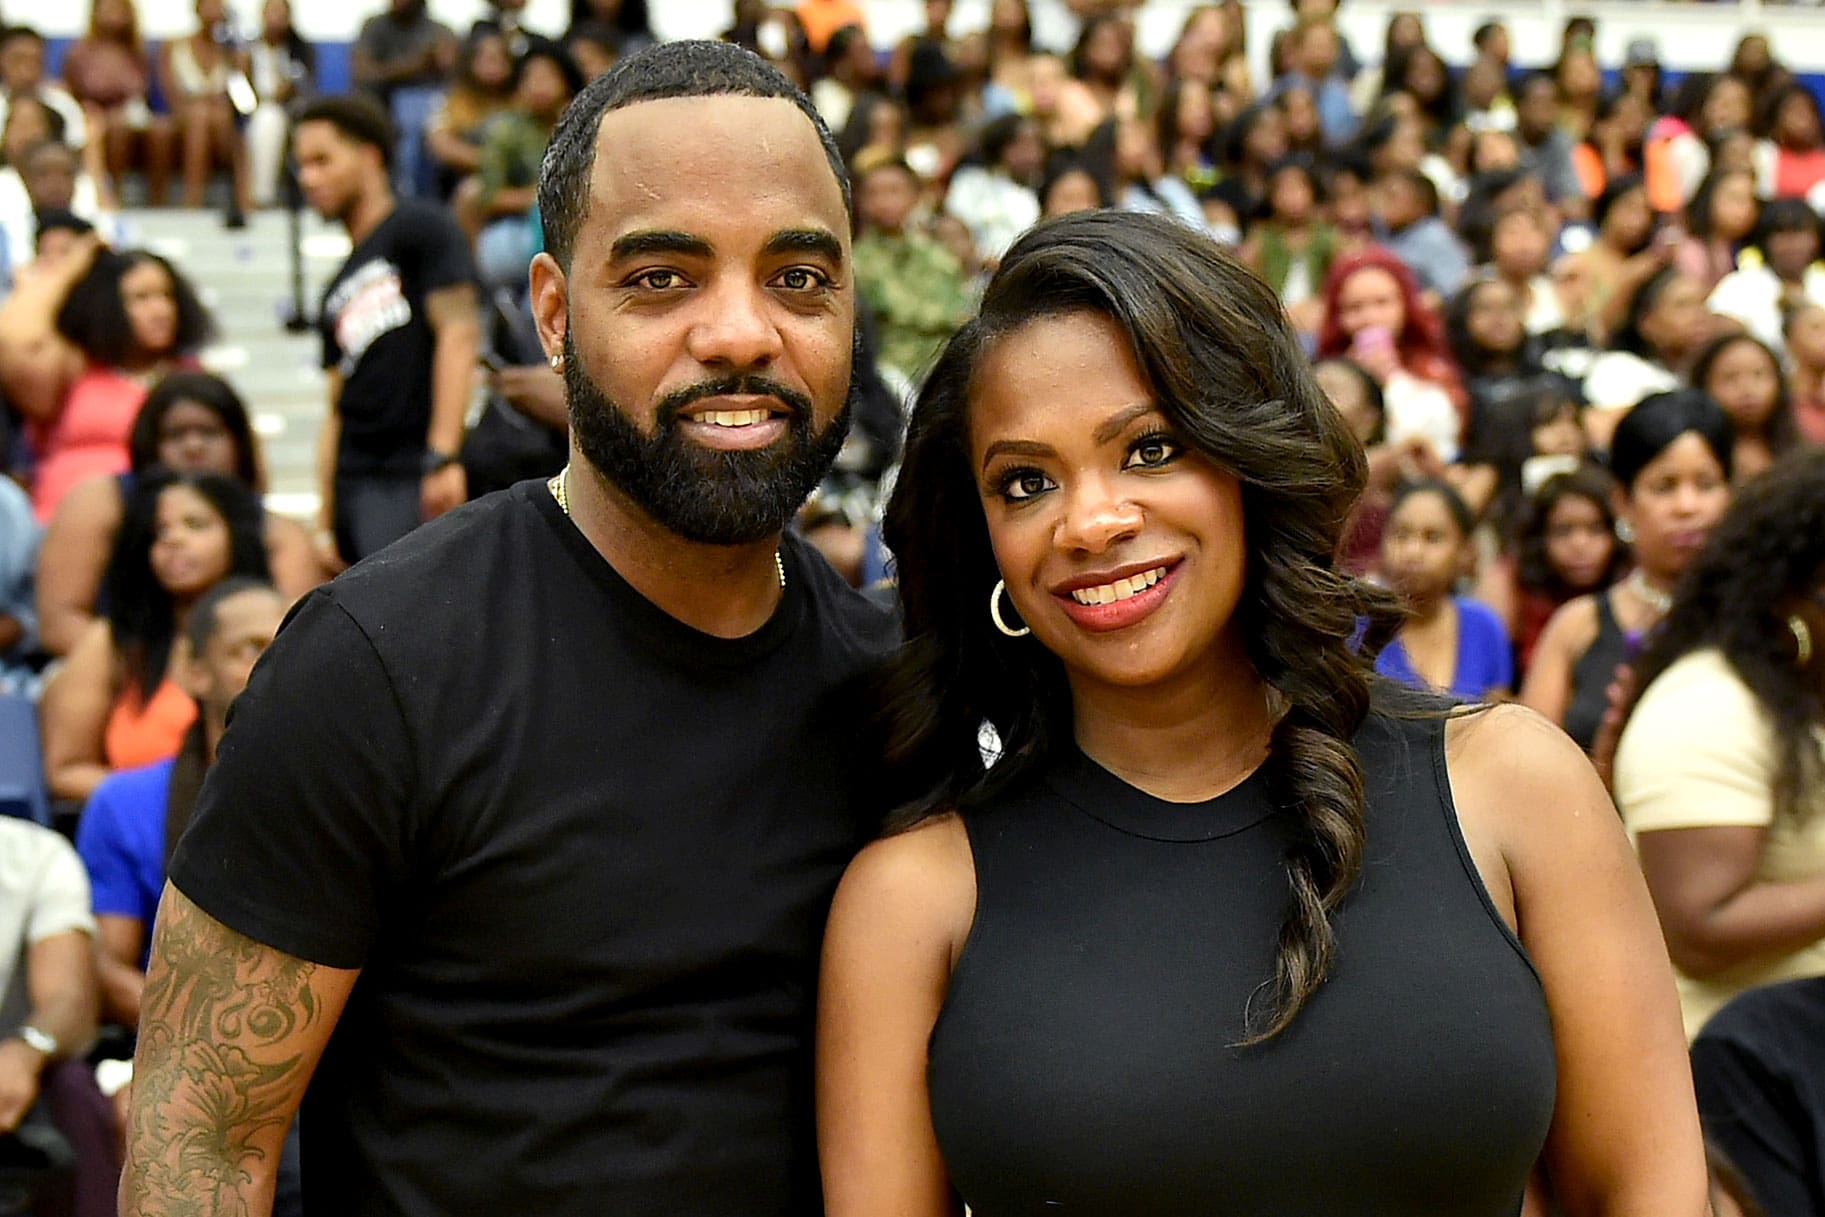 Kandi Burruss Makes Fans Laugh With Some Corny T-Shirts That She And Todd Tucker Wore